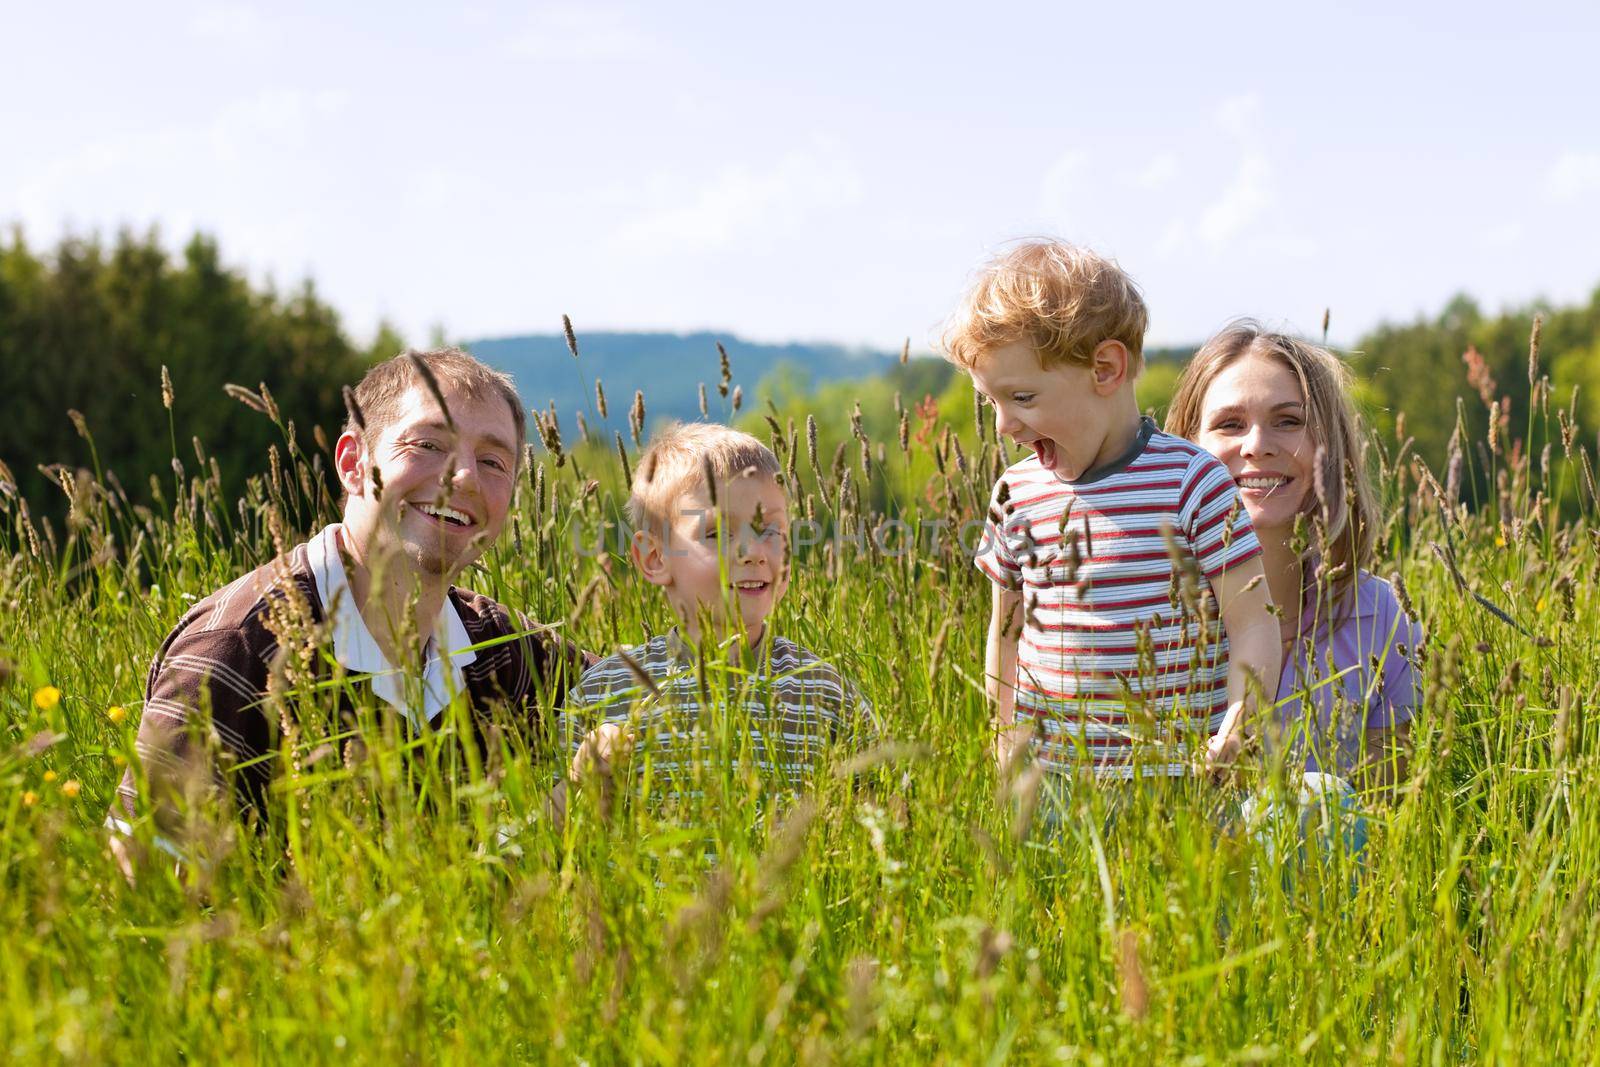 Very happy family with two kids sitting in a  meadow in the summer sun in front of a forest and hills, they are nearly hidden by the high grass, very peaceful scene